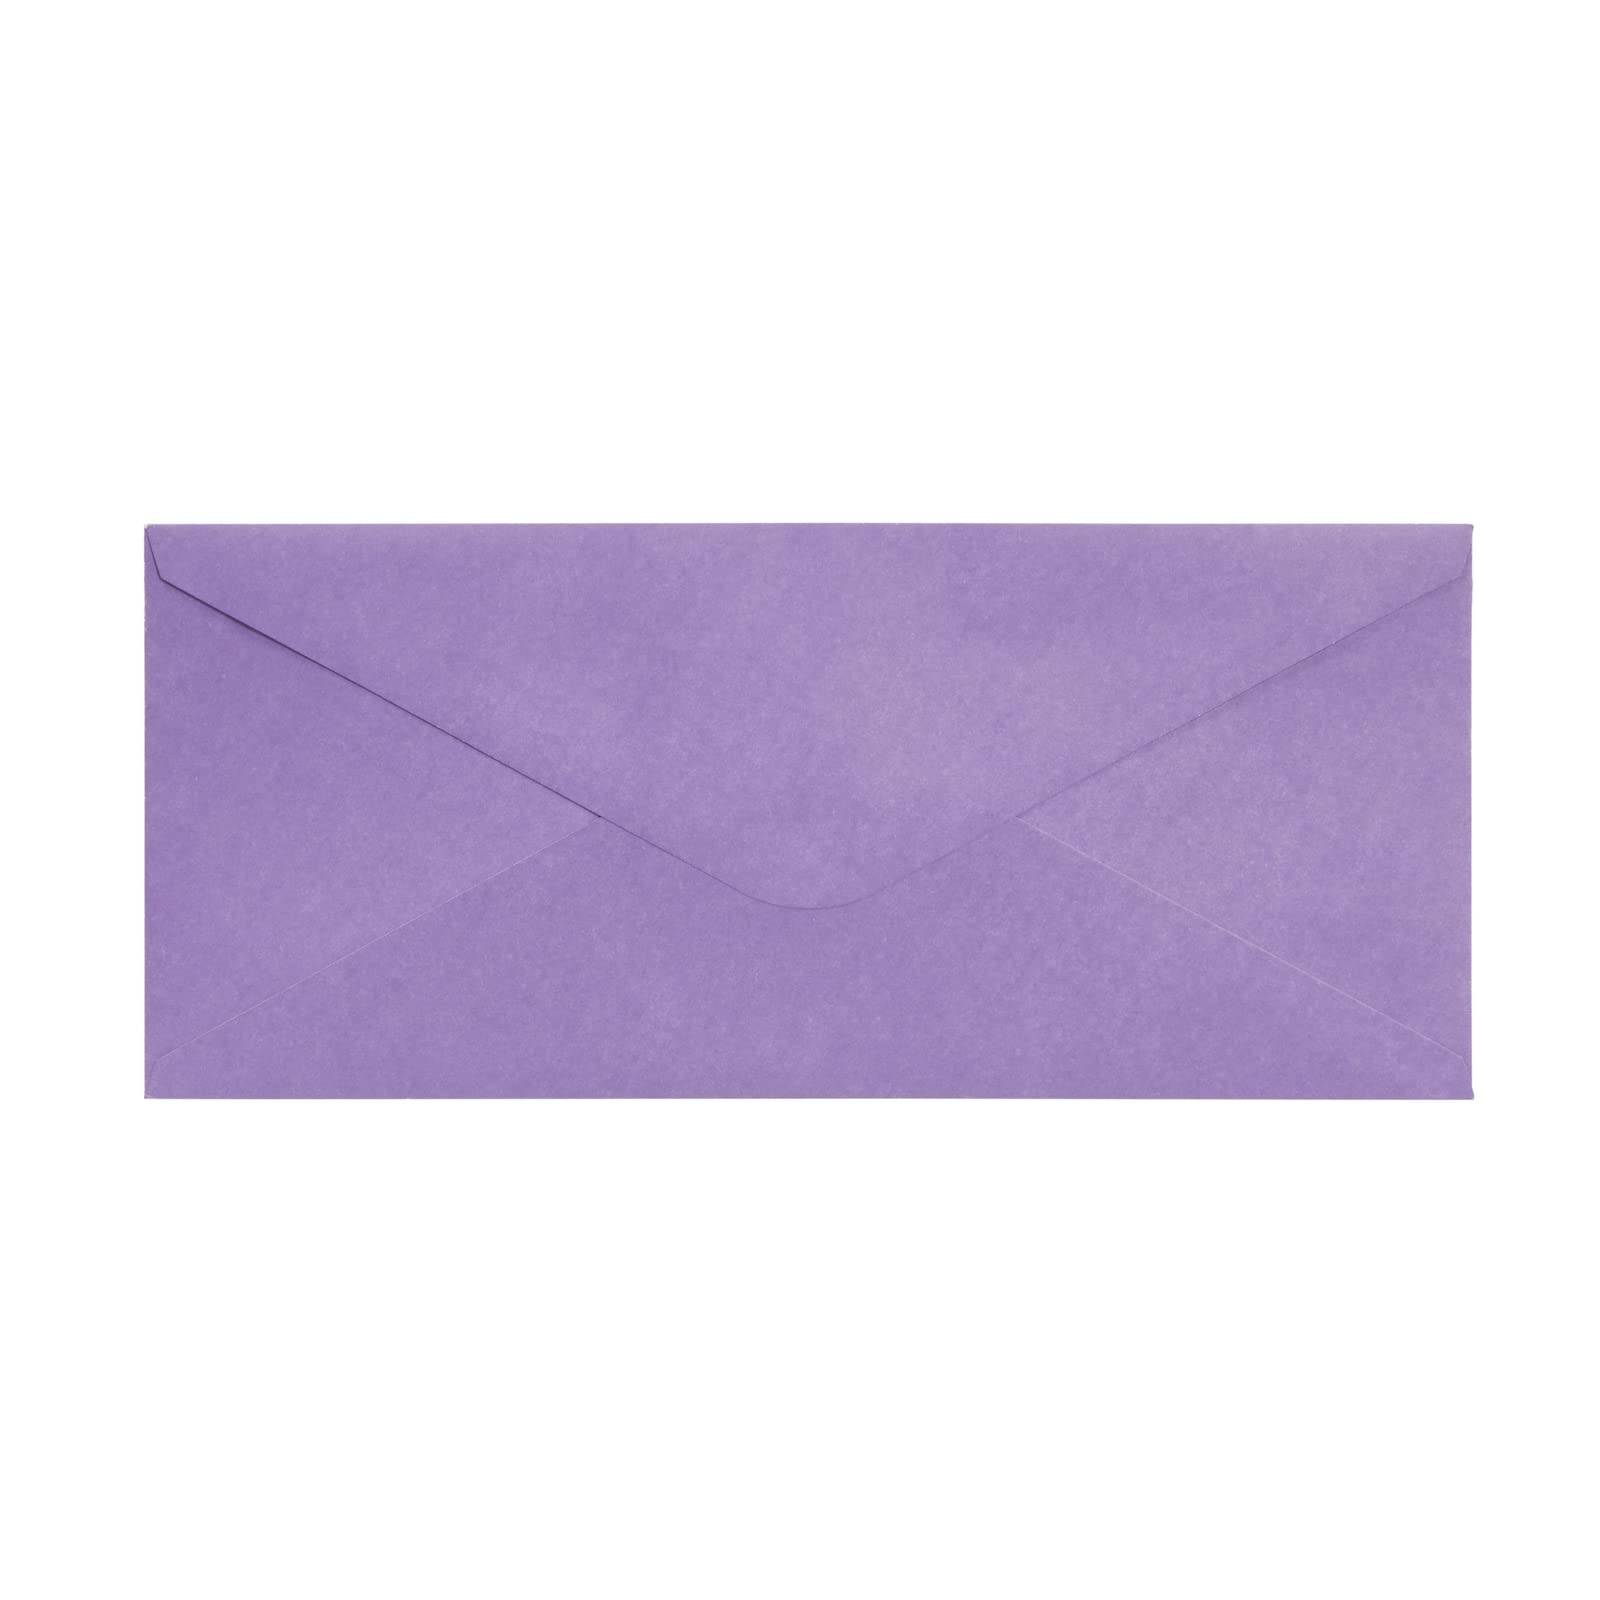 200-Pack #10 Purple Envelopes Bulk with Gummed Seal and V-Flap for Invitations, Mailing Business Letters, Checks, Greeting Cards, Holidays, Notes, and Photos (4 1/8 x 9 1/2 in)